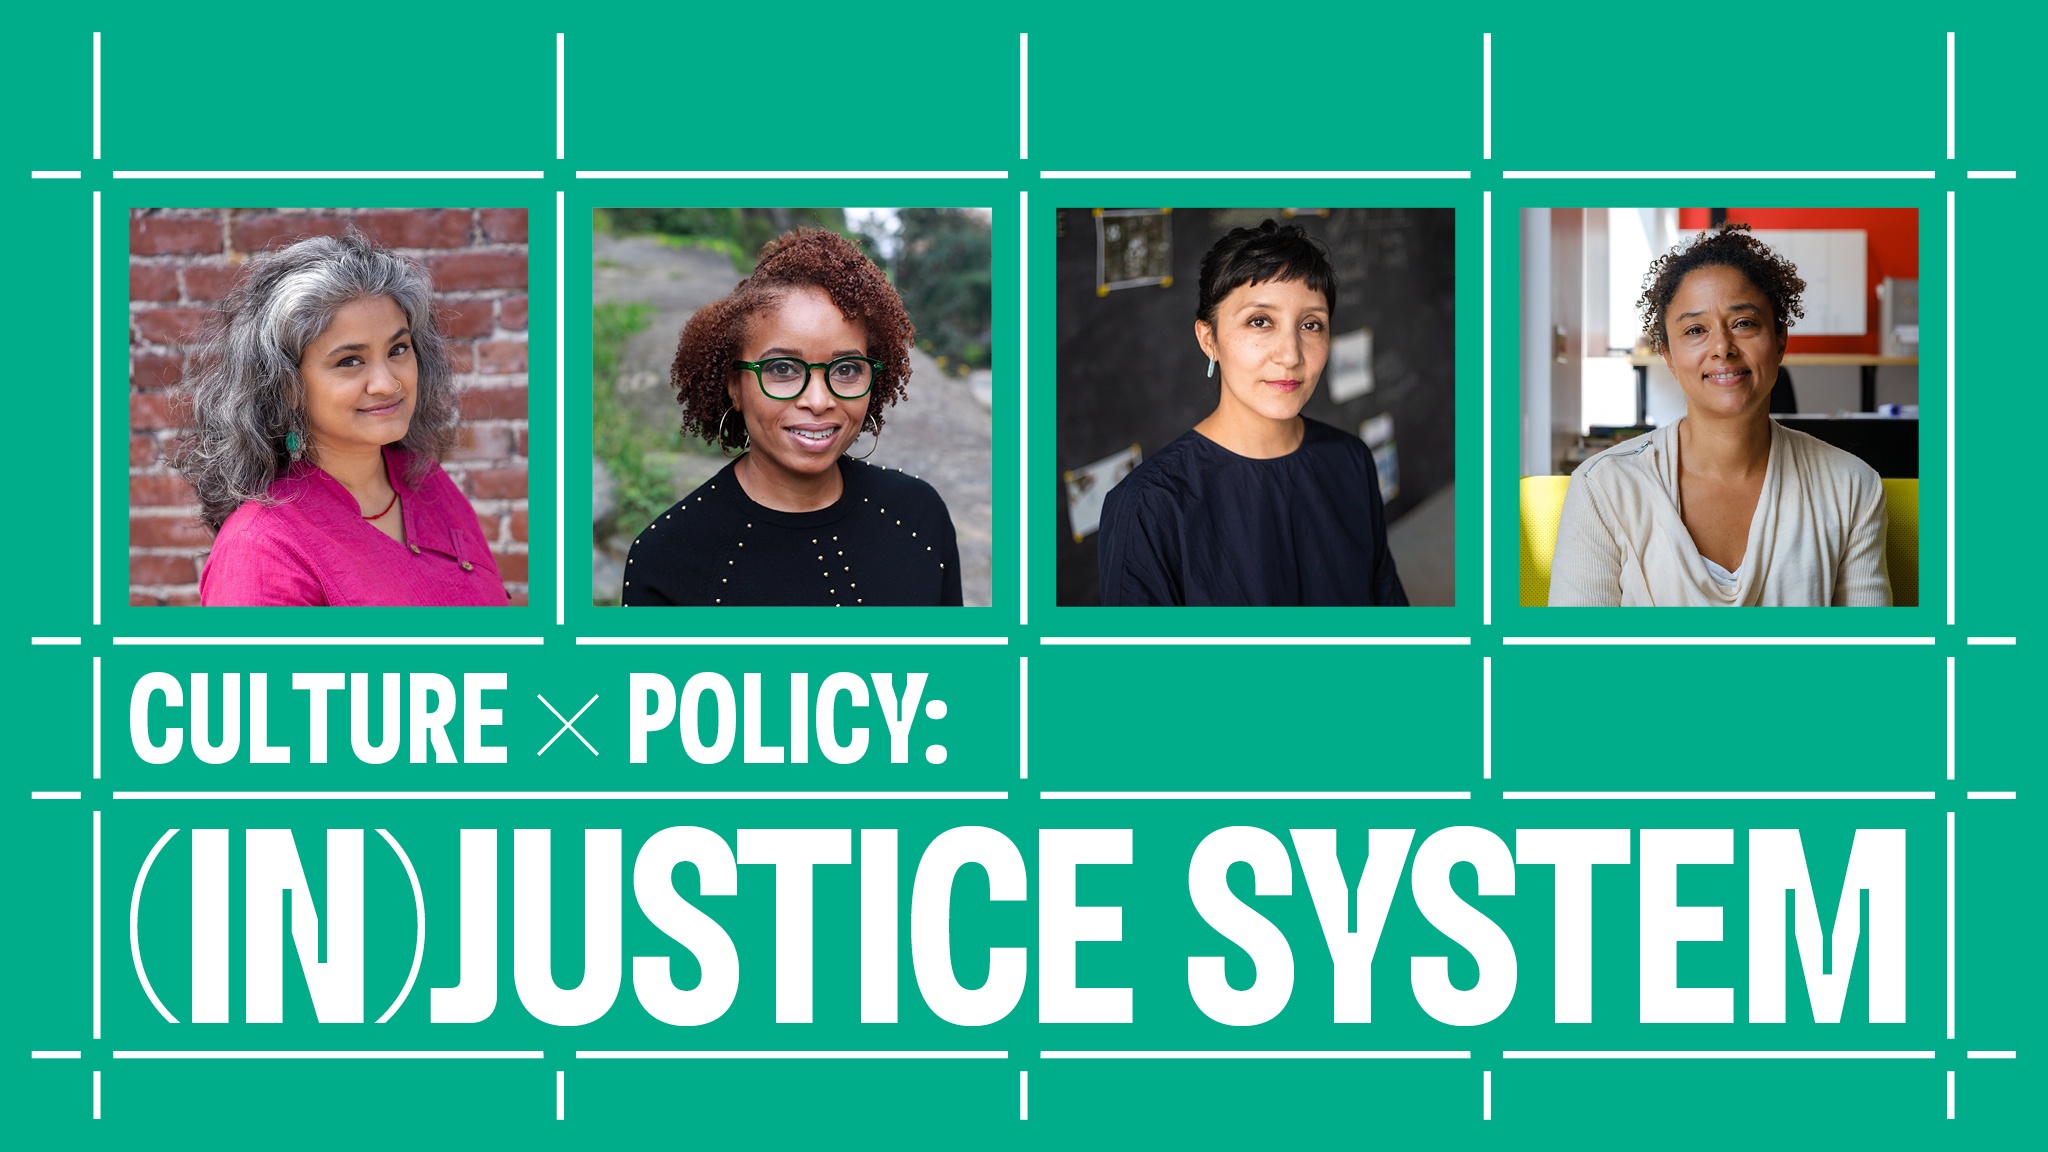 A white grid on a green background that contains four photos of participants in the Culture x Policy: (In)Justice System conversation, from left to right: sujatha baliga, Nicole Fleetwood, Maria Gaspar, and Deanna Van Buren